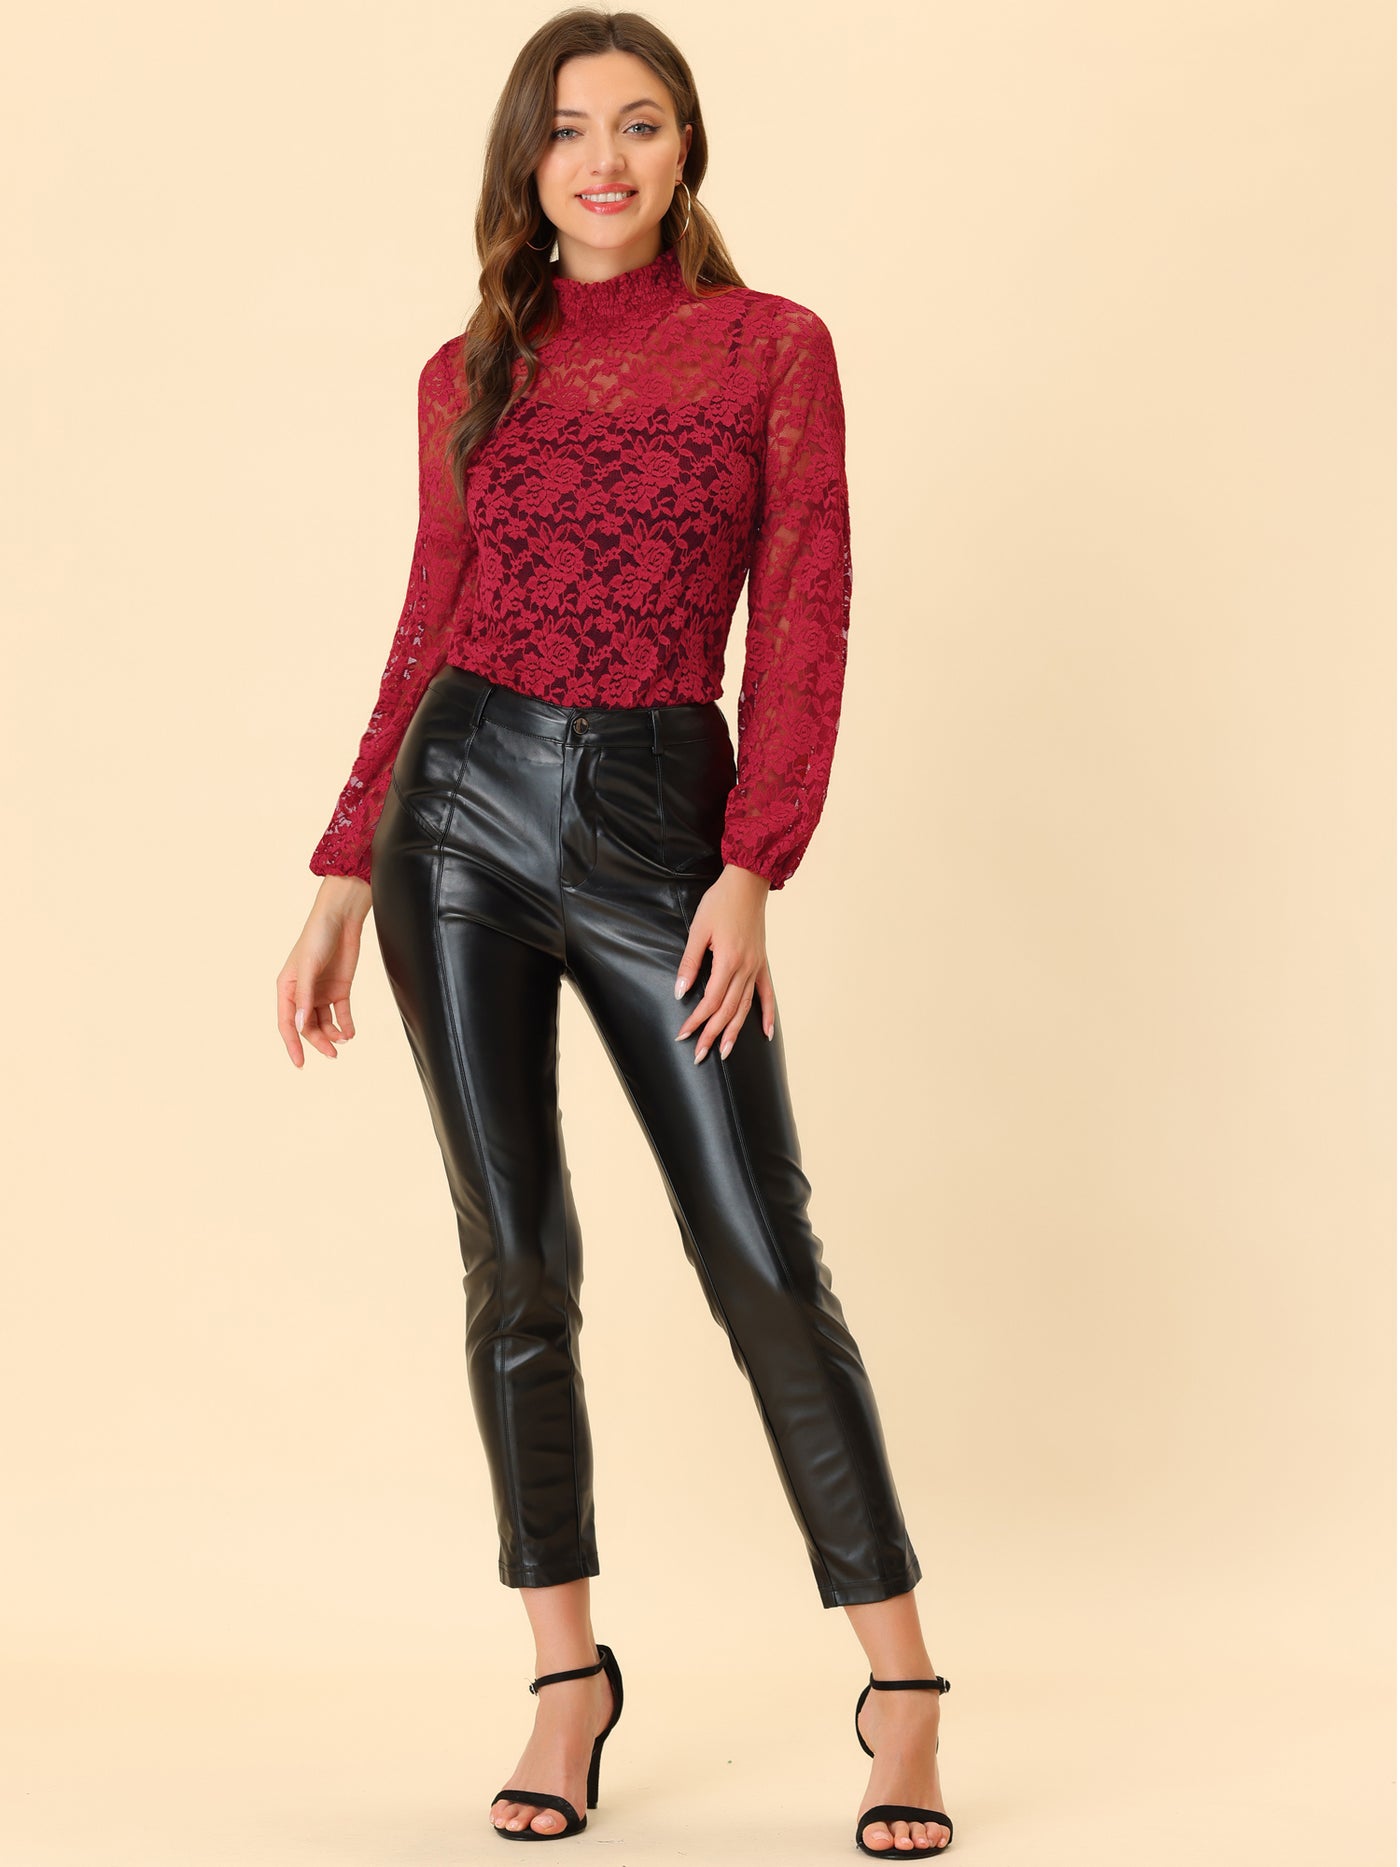 Allegra K Floral Lace Top Turtleneck Puff Long Sleeve See Through Sheer Blouse